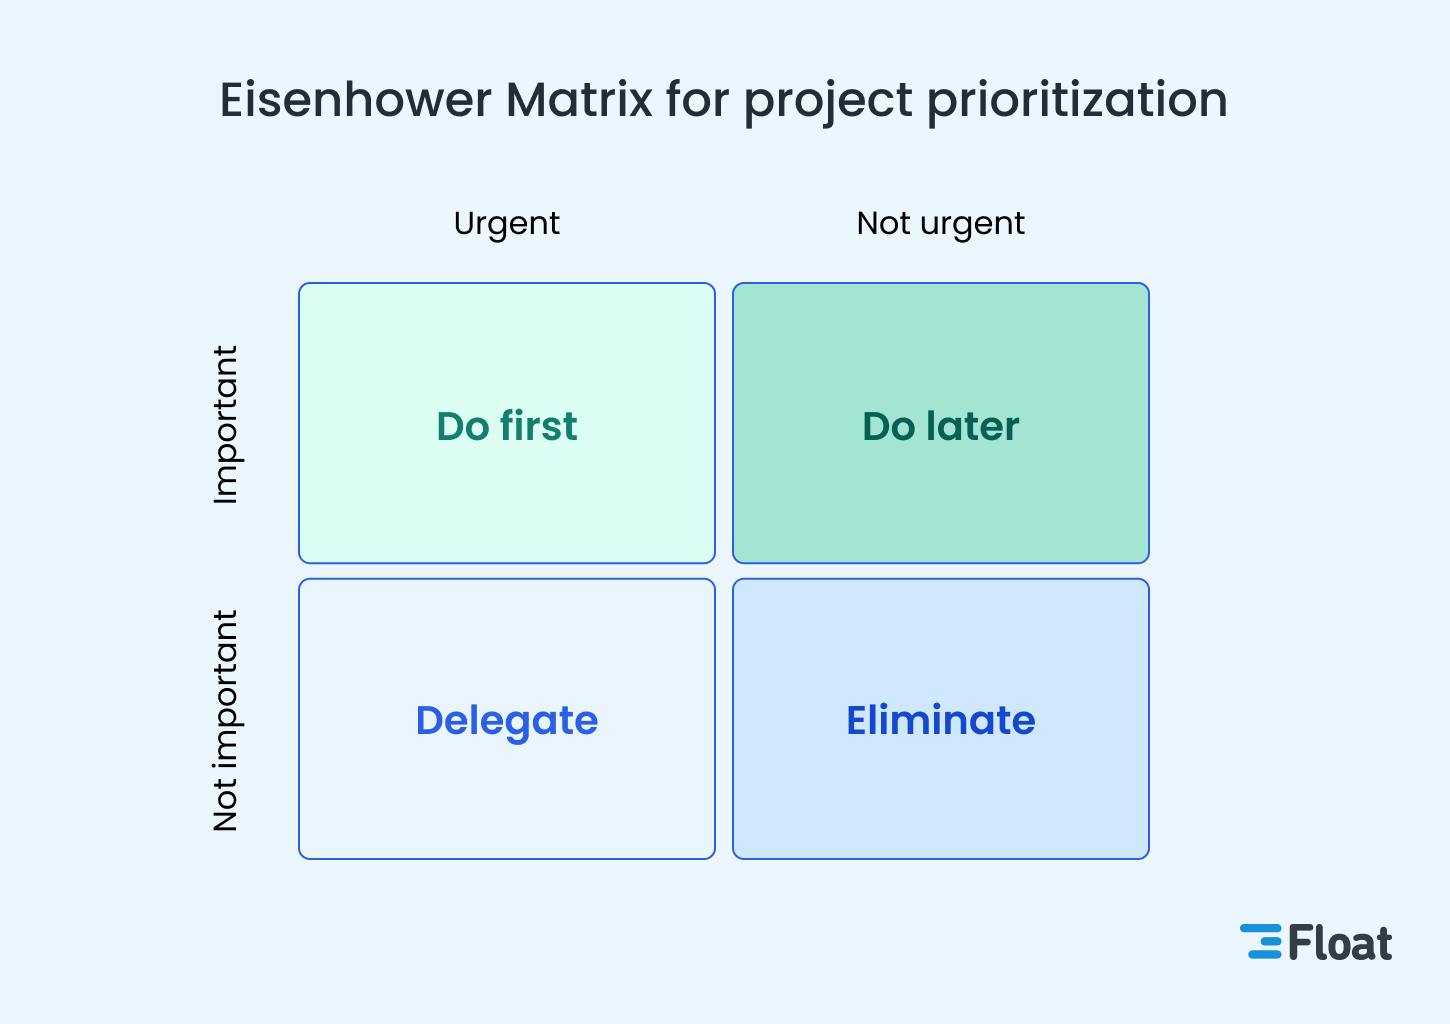 The Eisenhower Matrix for project prioritization 